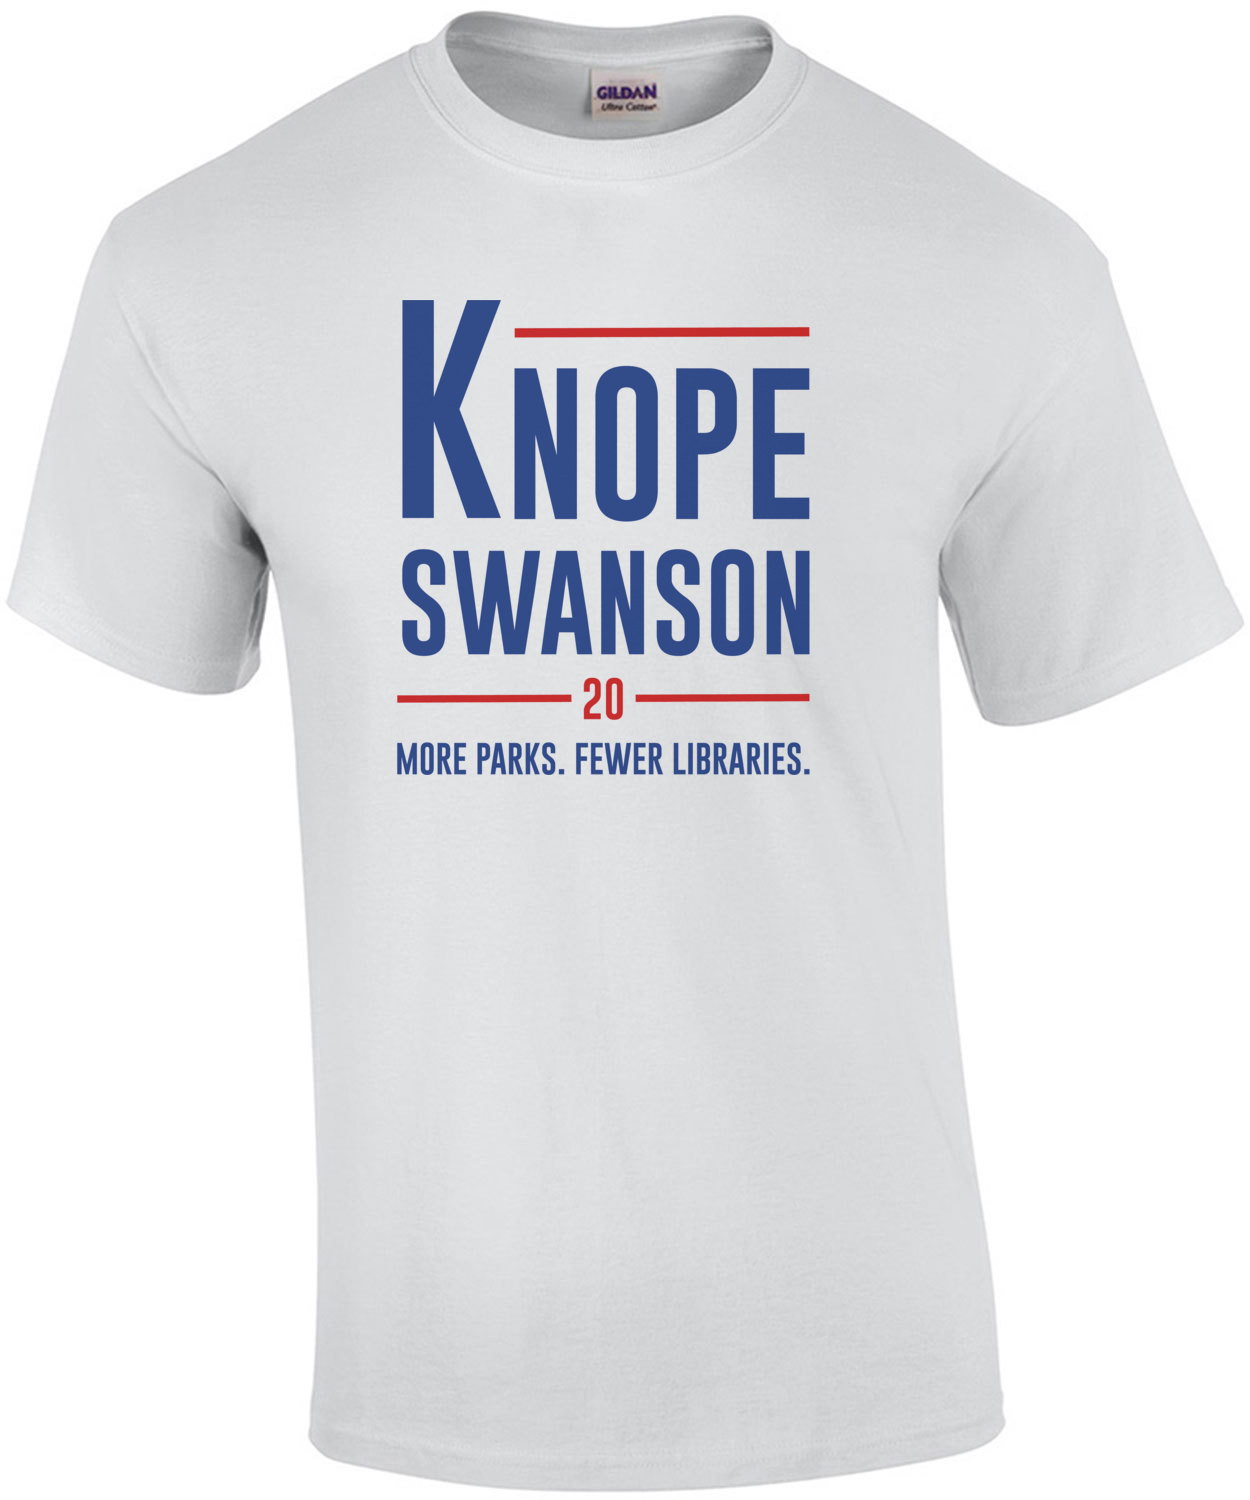 Knope Swanson 20 - More Parks. Fewer Libraries. Parks and Recreation T-Shirt - 2020 Election T-Shirt